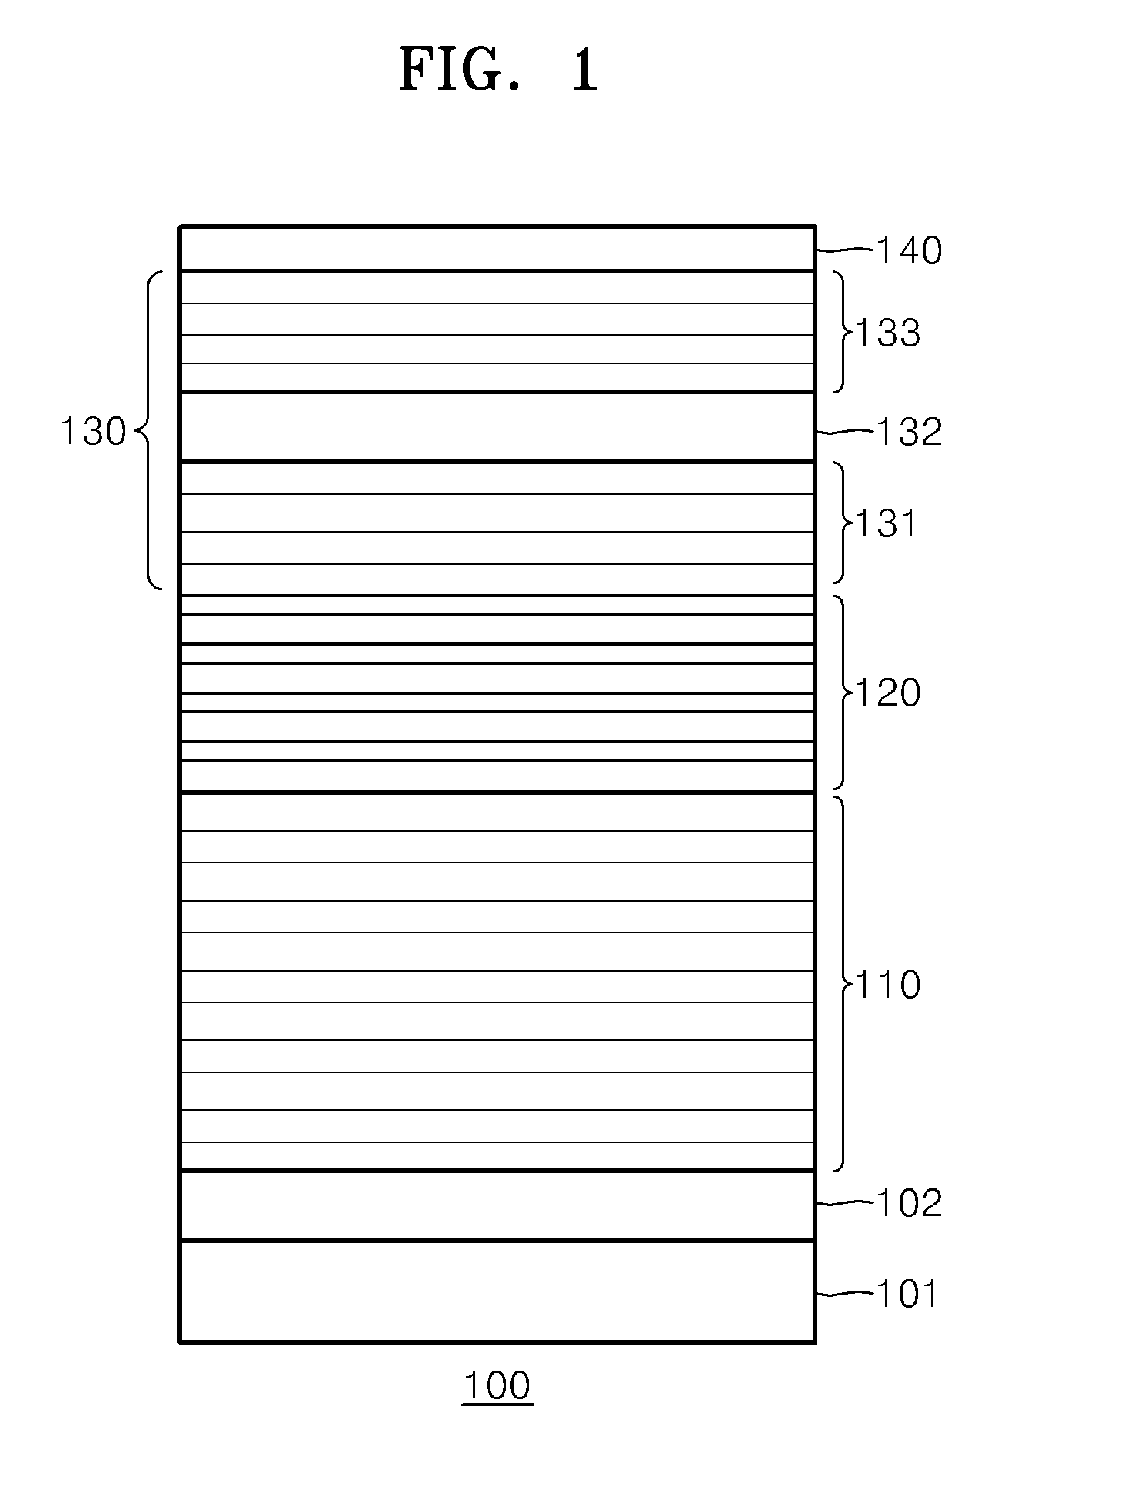 Optical modulator using multiple fabry-perot resonant modes and apparatus for capturing 3D image including the optical modulator